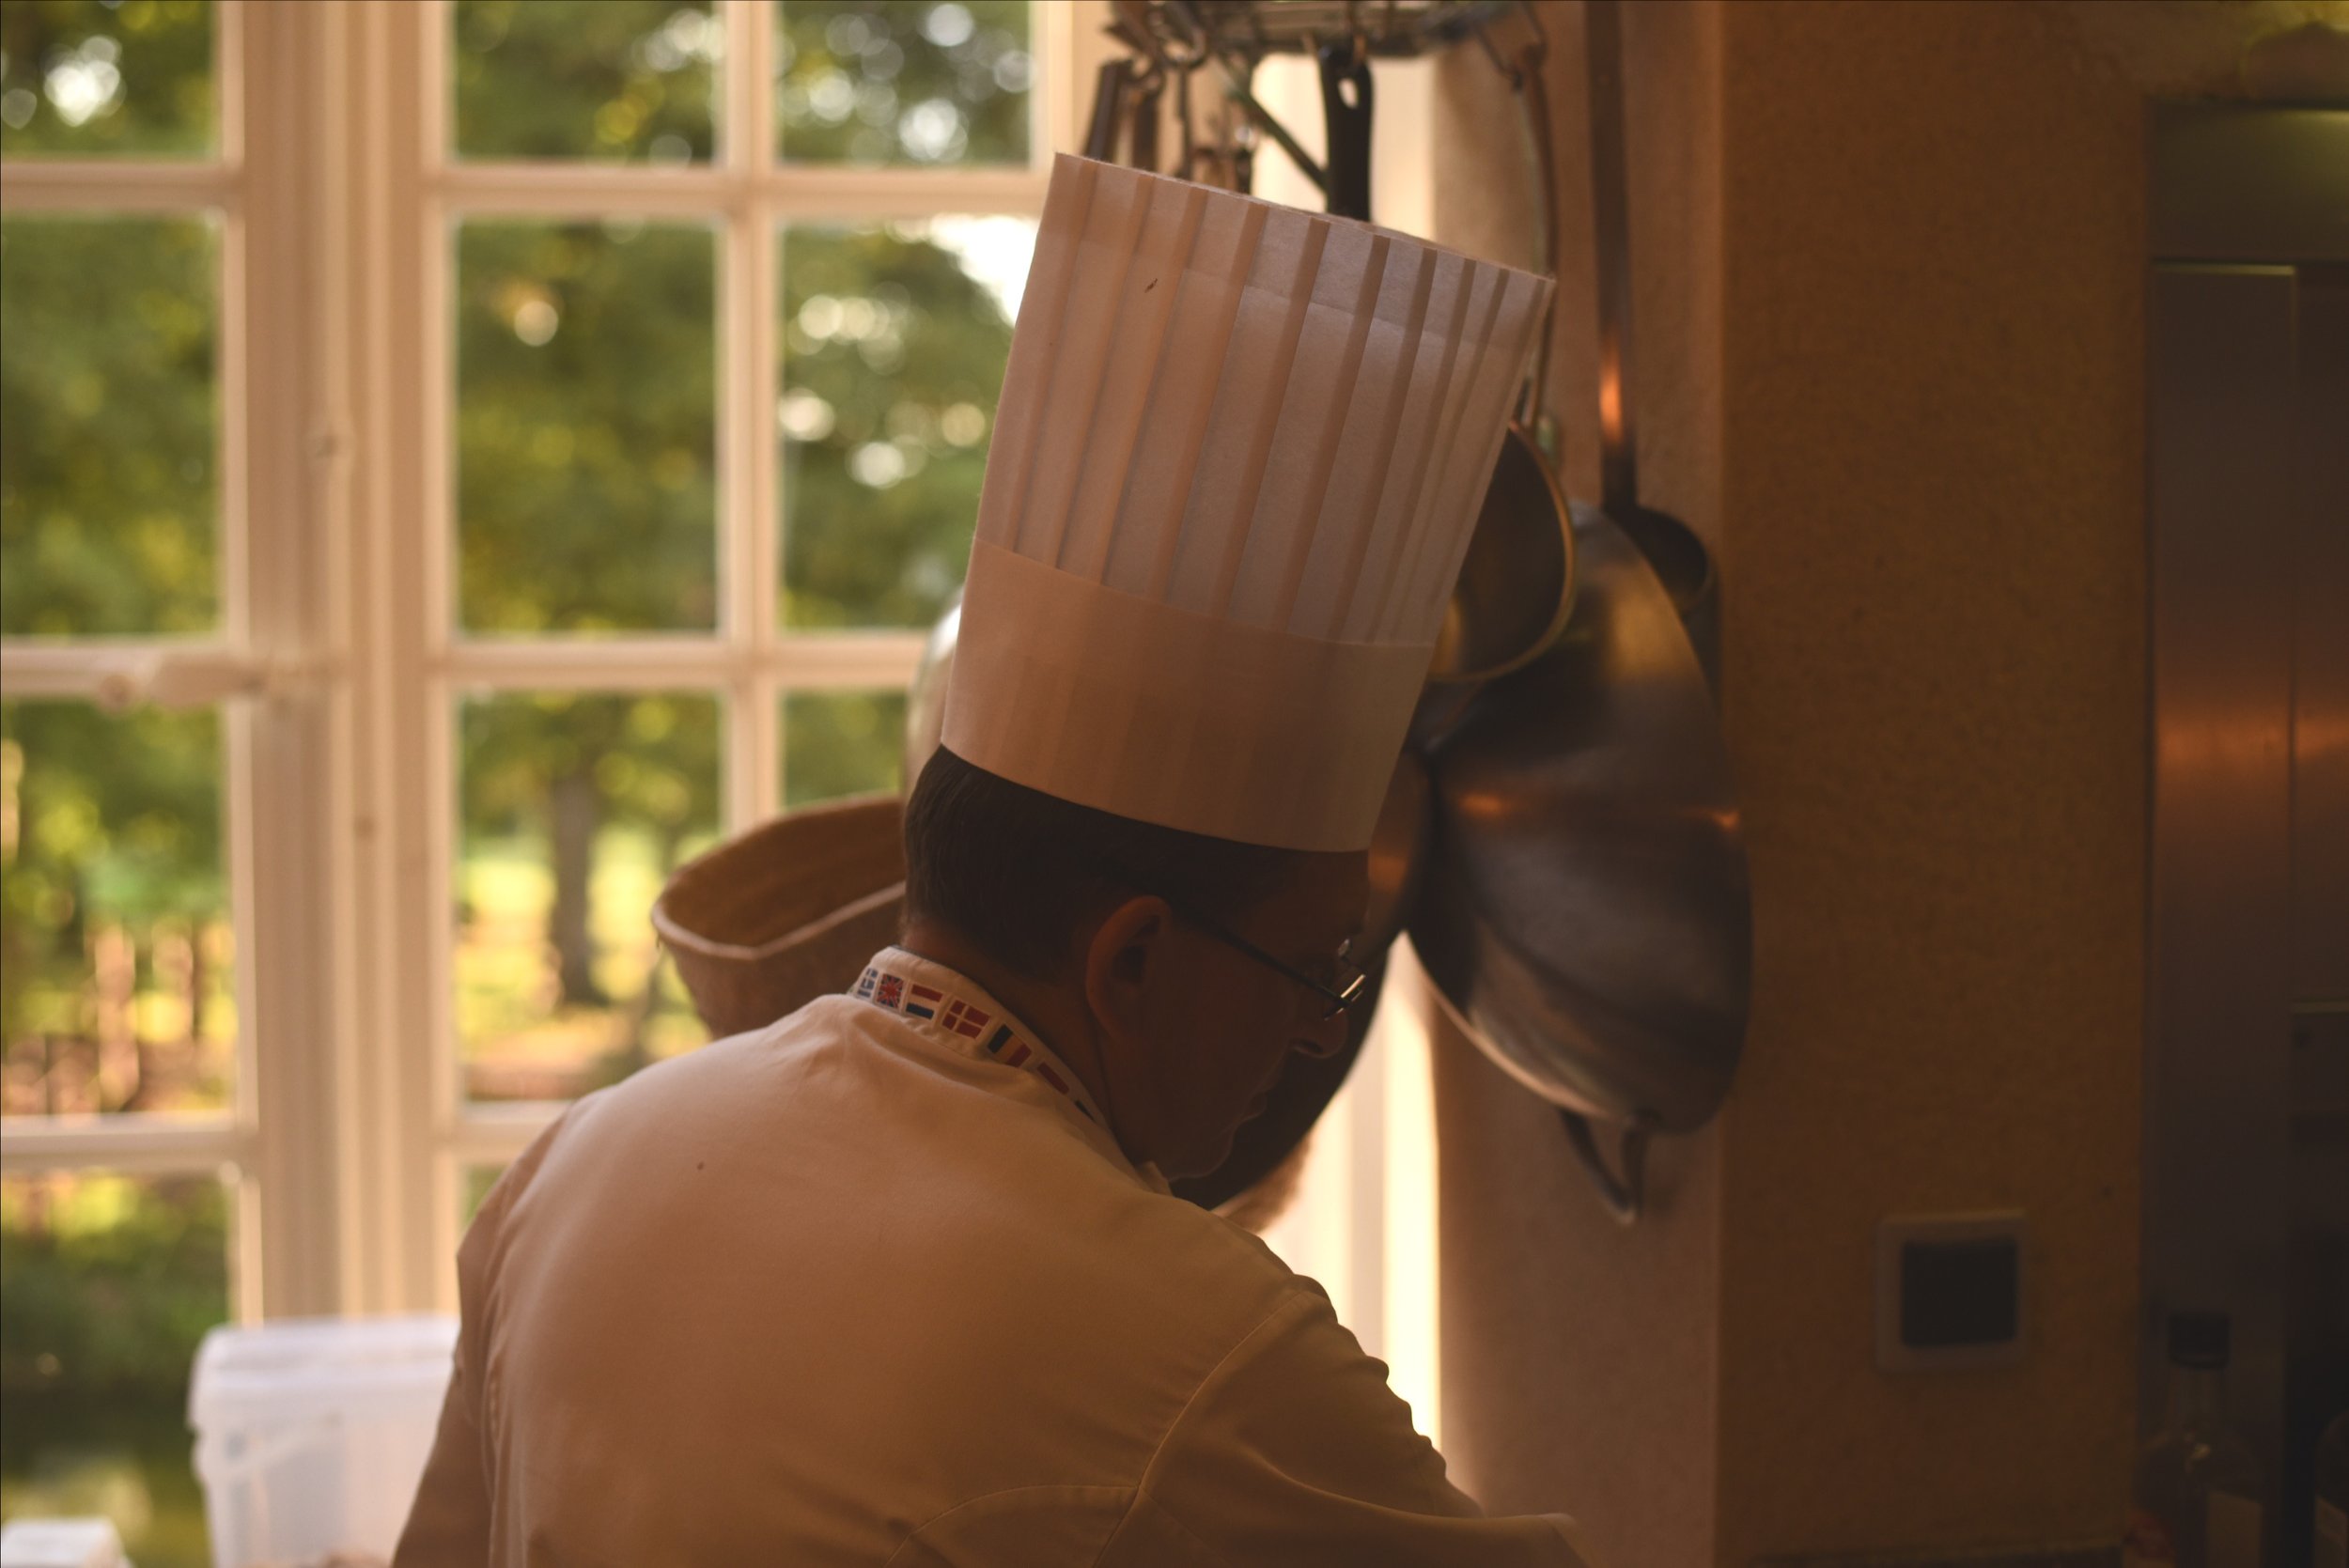 A chef wearing a tall white toque hat in the kitchenat Chateau de Courtomer, Normandy